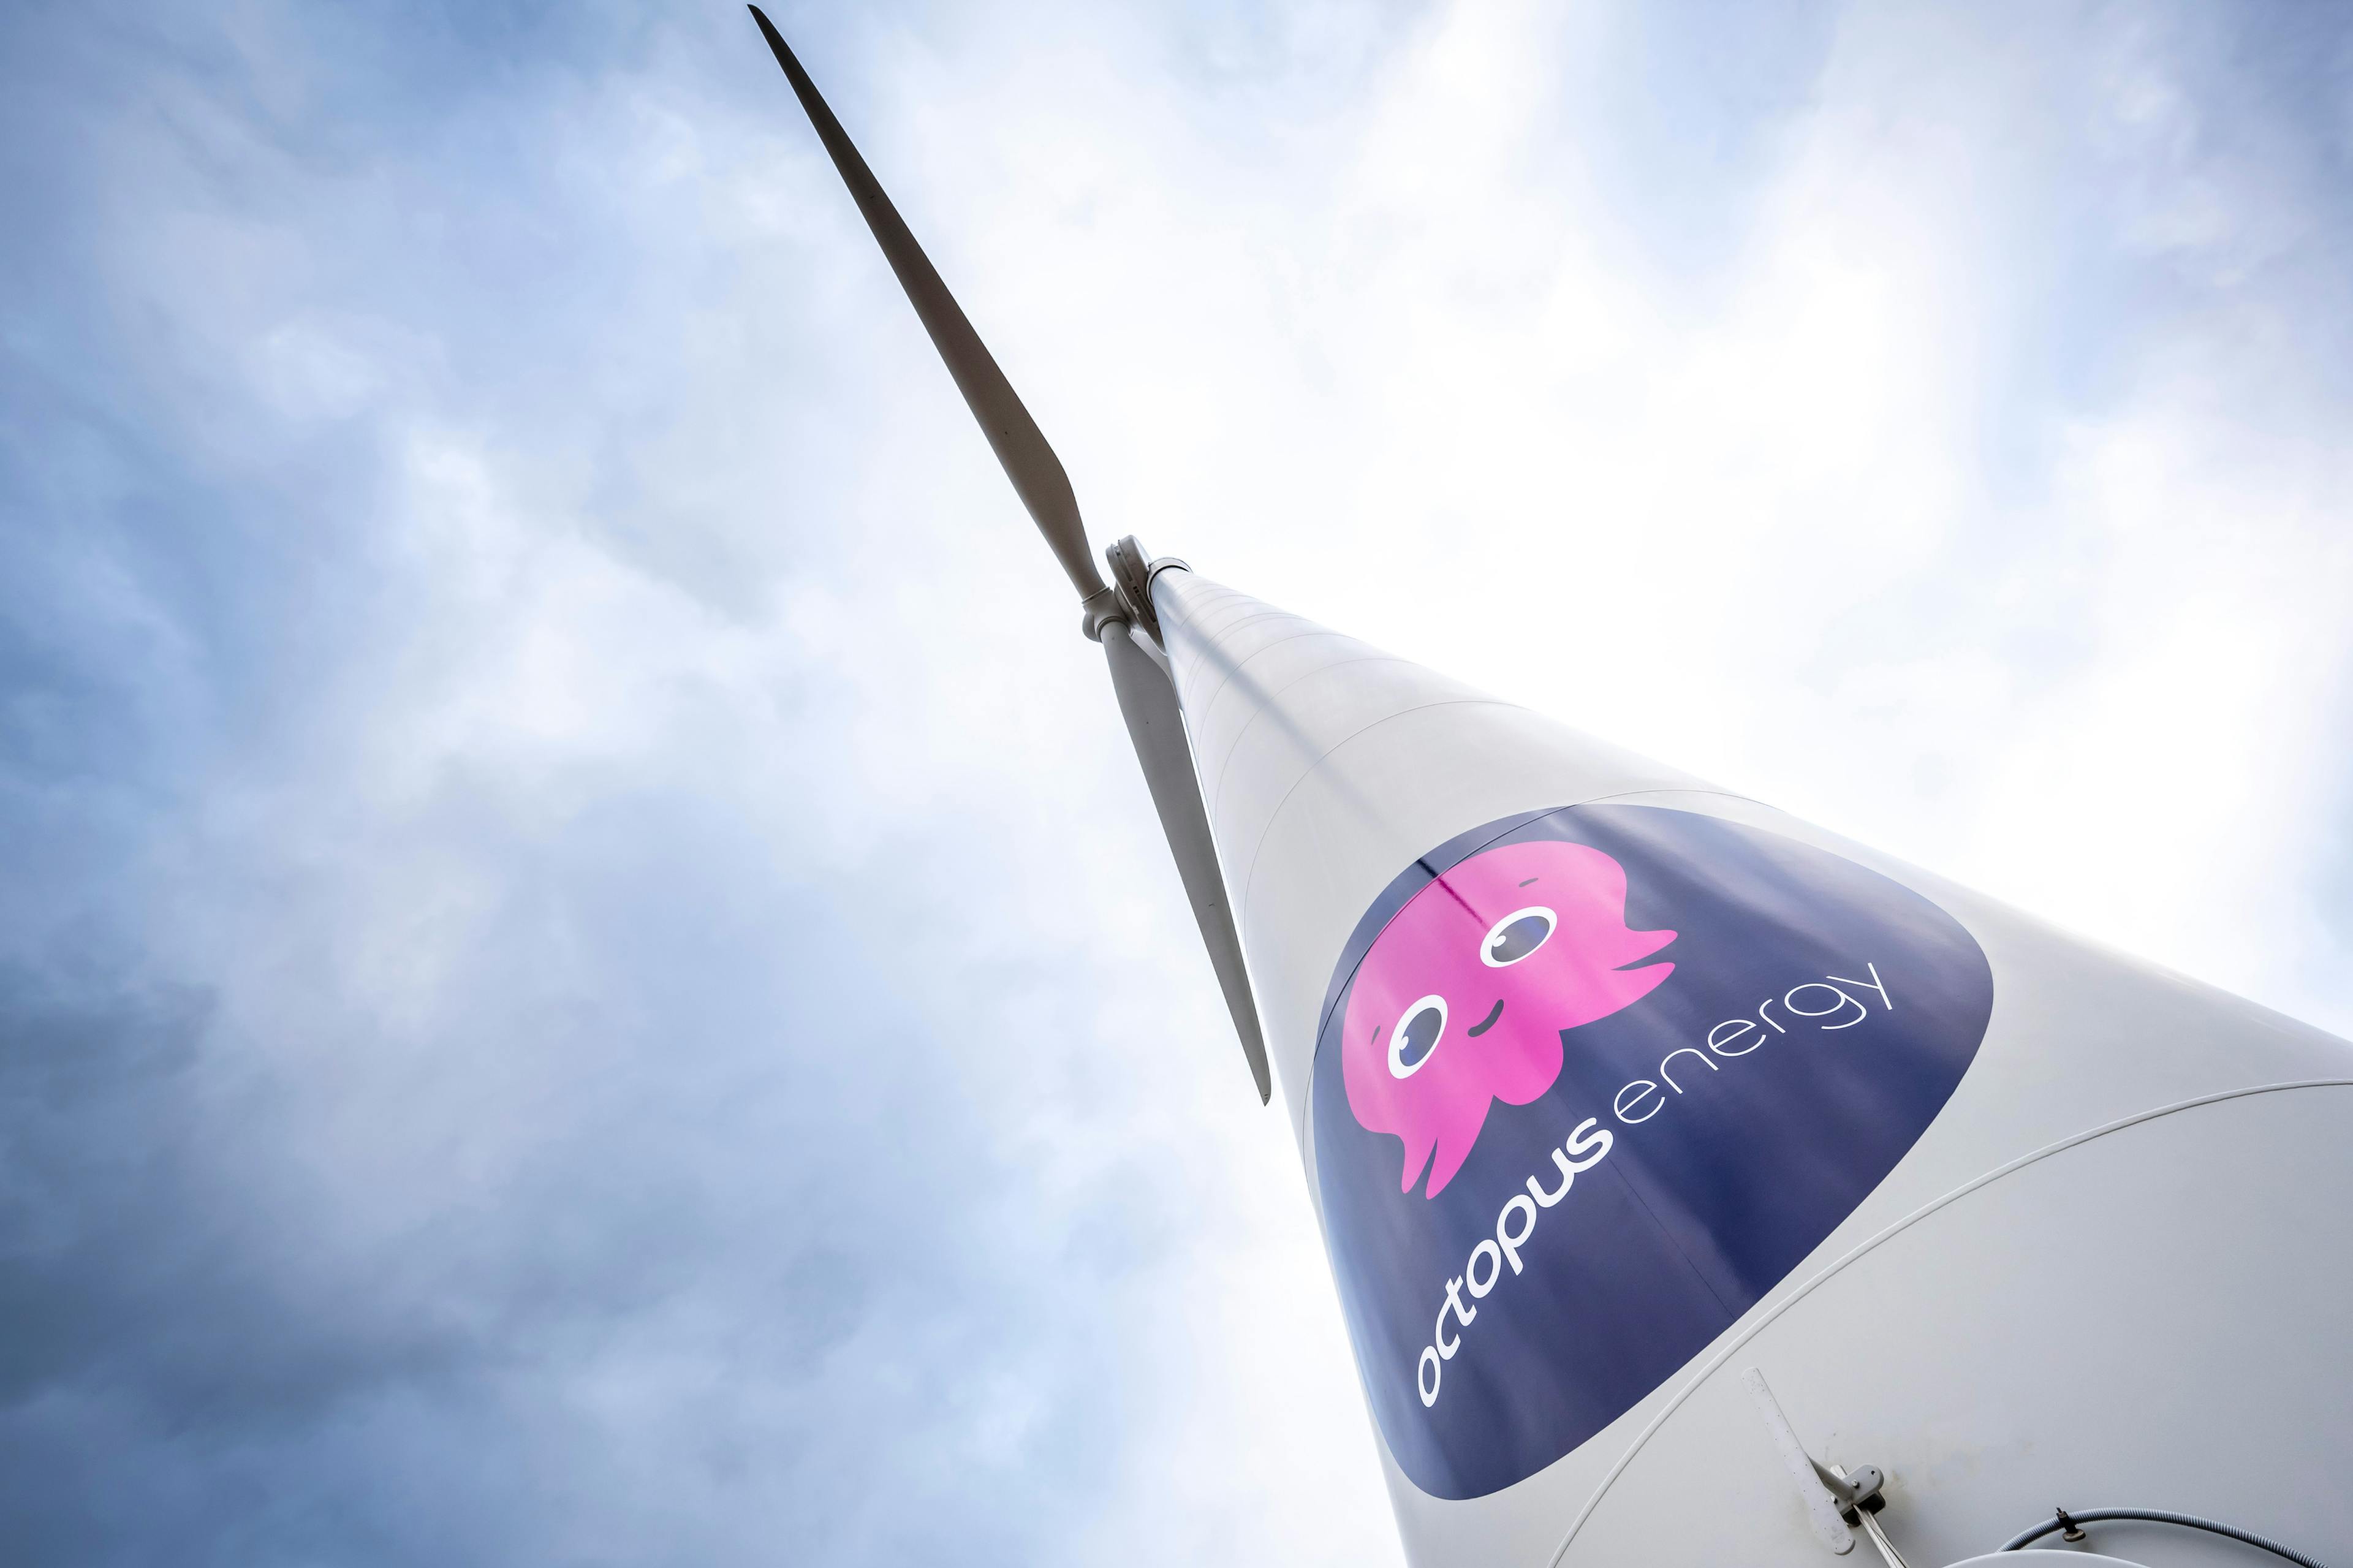 A wind turbine photographed from its base, with the Octopus Energy logo visible